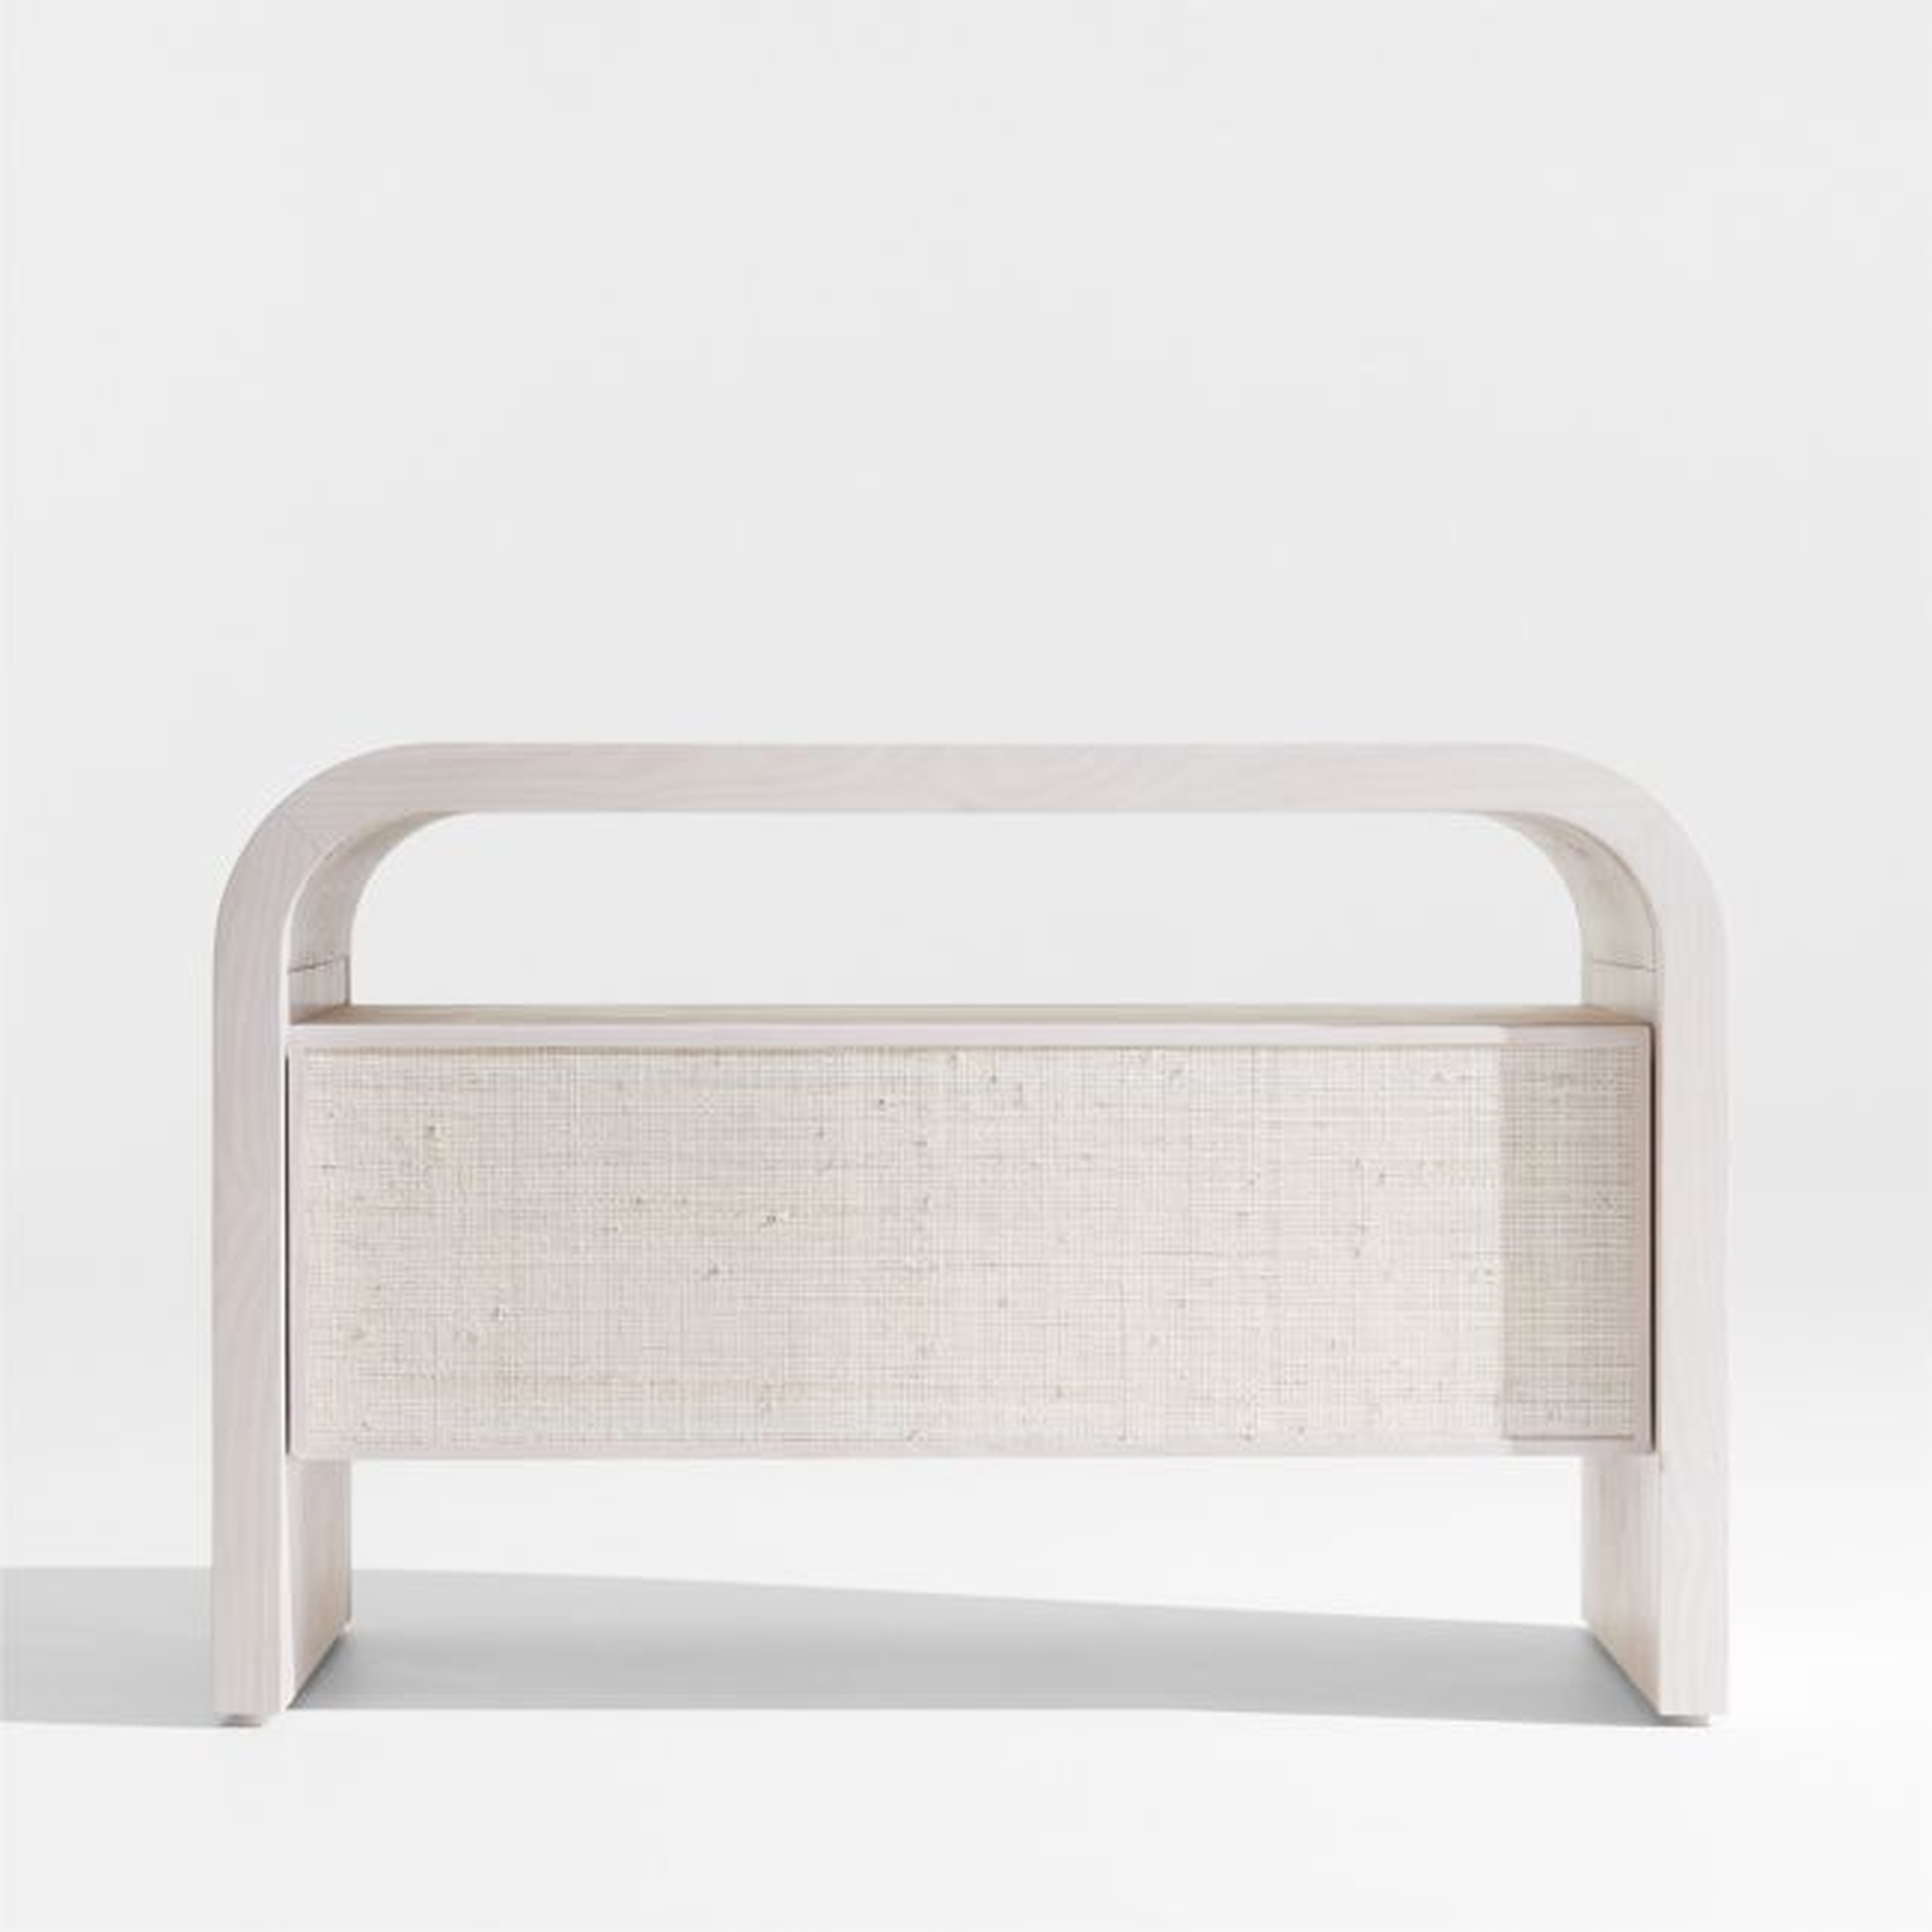 Rica Whitewash Grasscloth Nightstand by Leanne Ford - Crate and Barrel